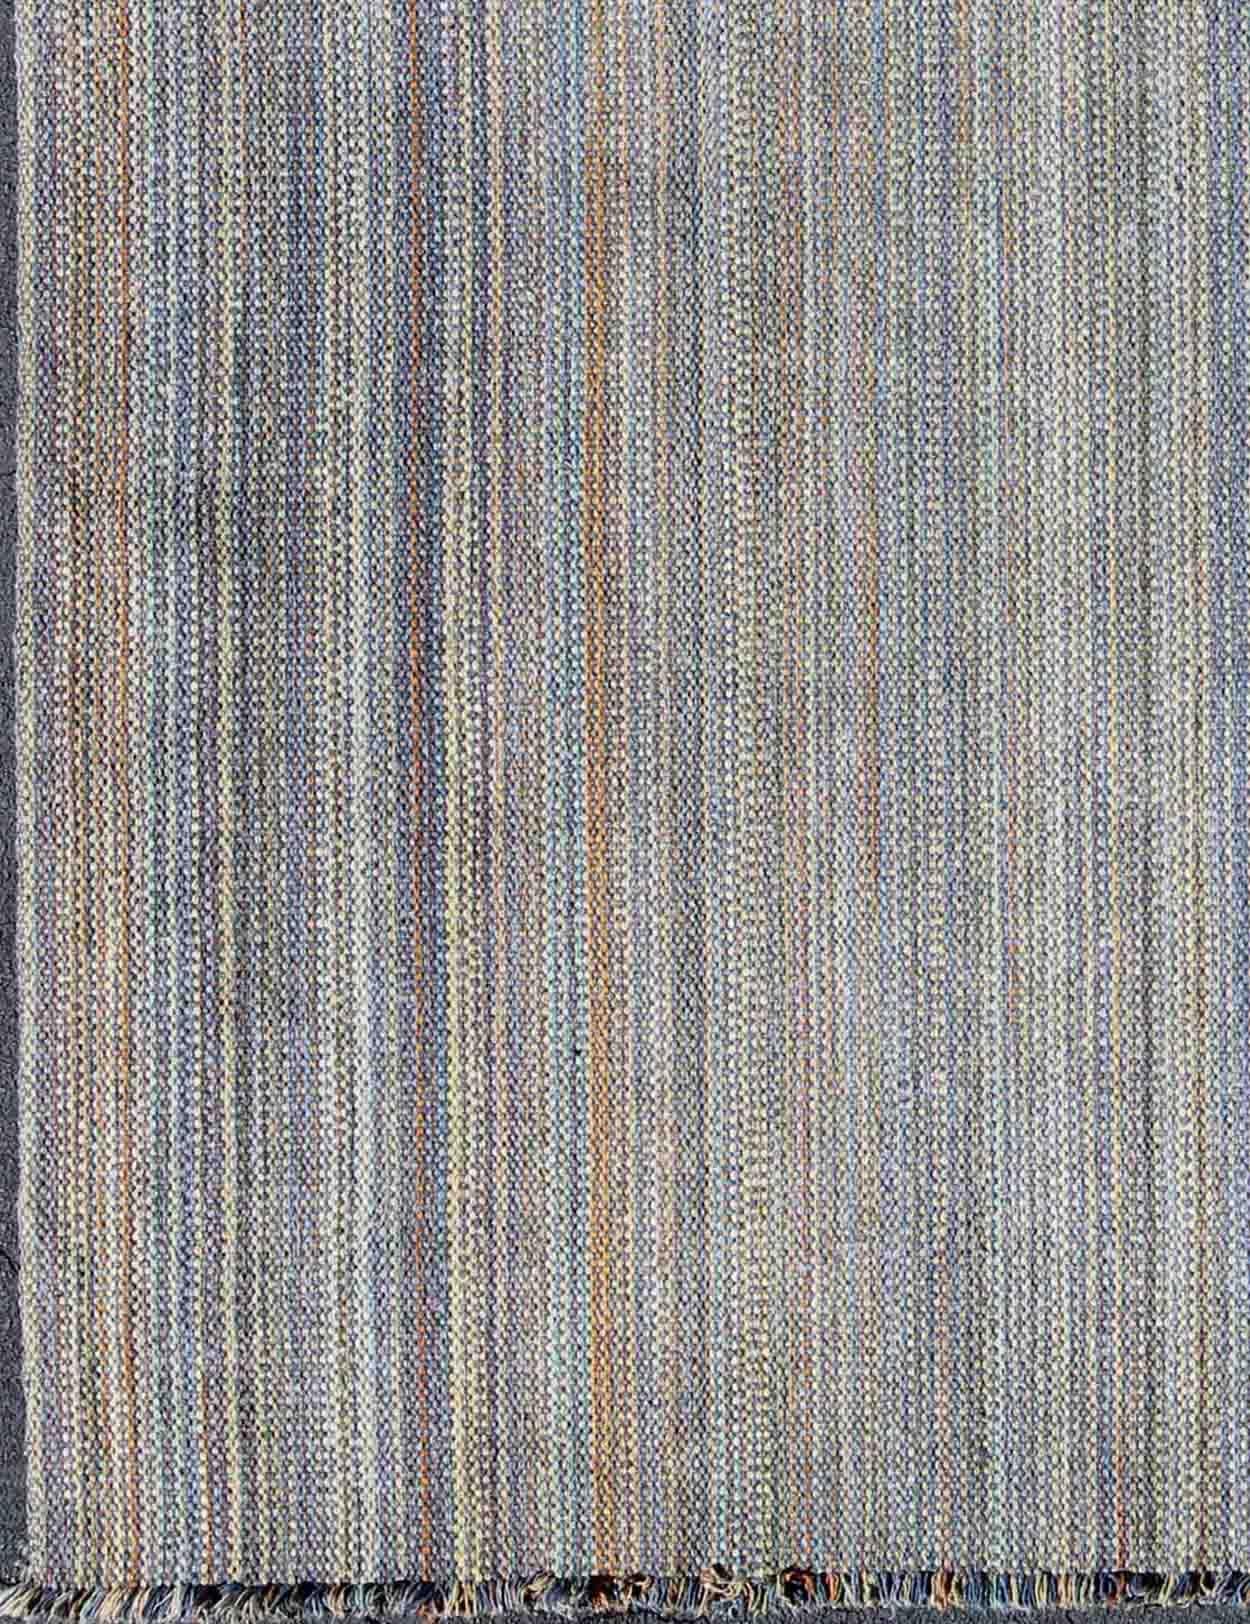 Measures: 8'5 x 11'2

This large American braided rug features a unique color palette coupled with a fine demonstration of American weaving. The tones of each stripe come together to produce a magnificent display of blended beauty.

Country of